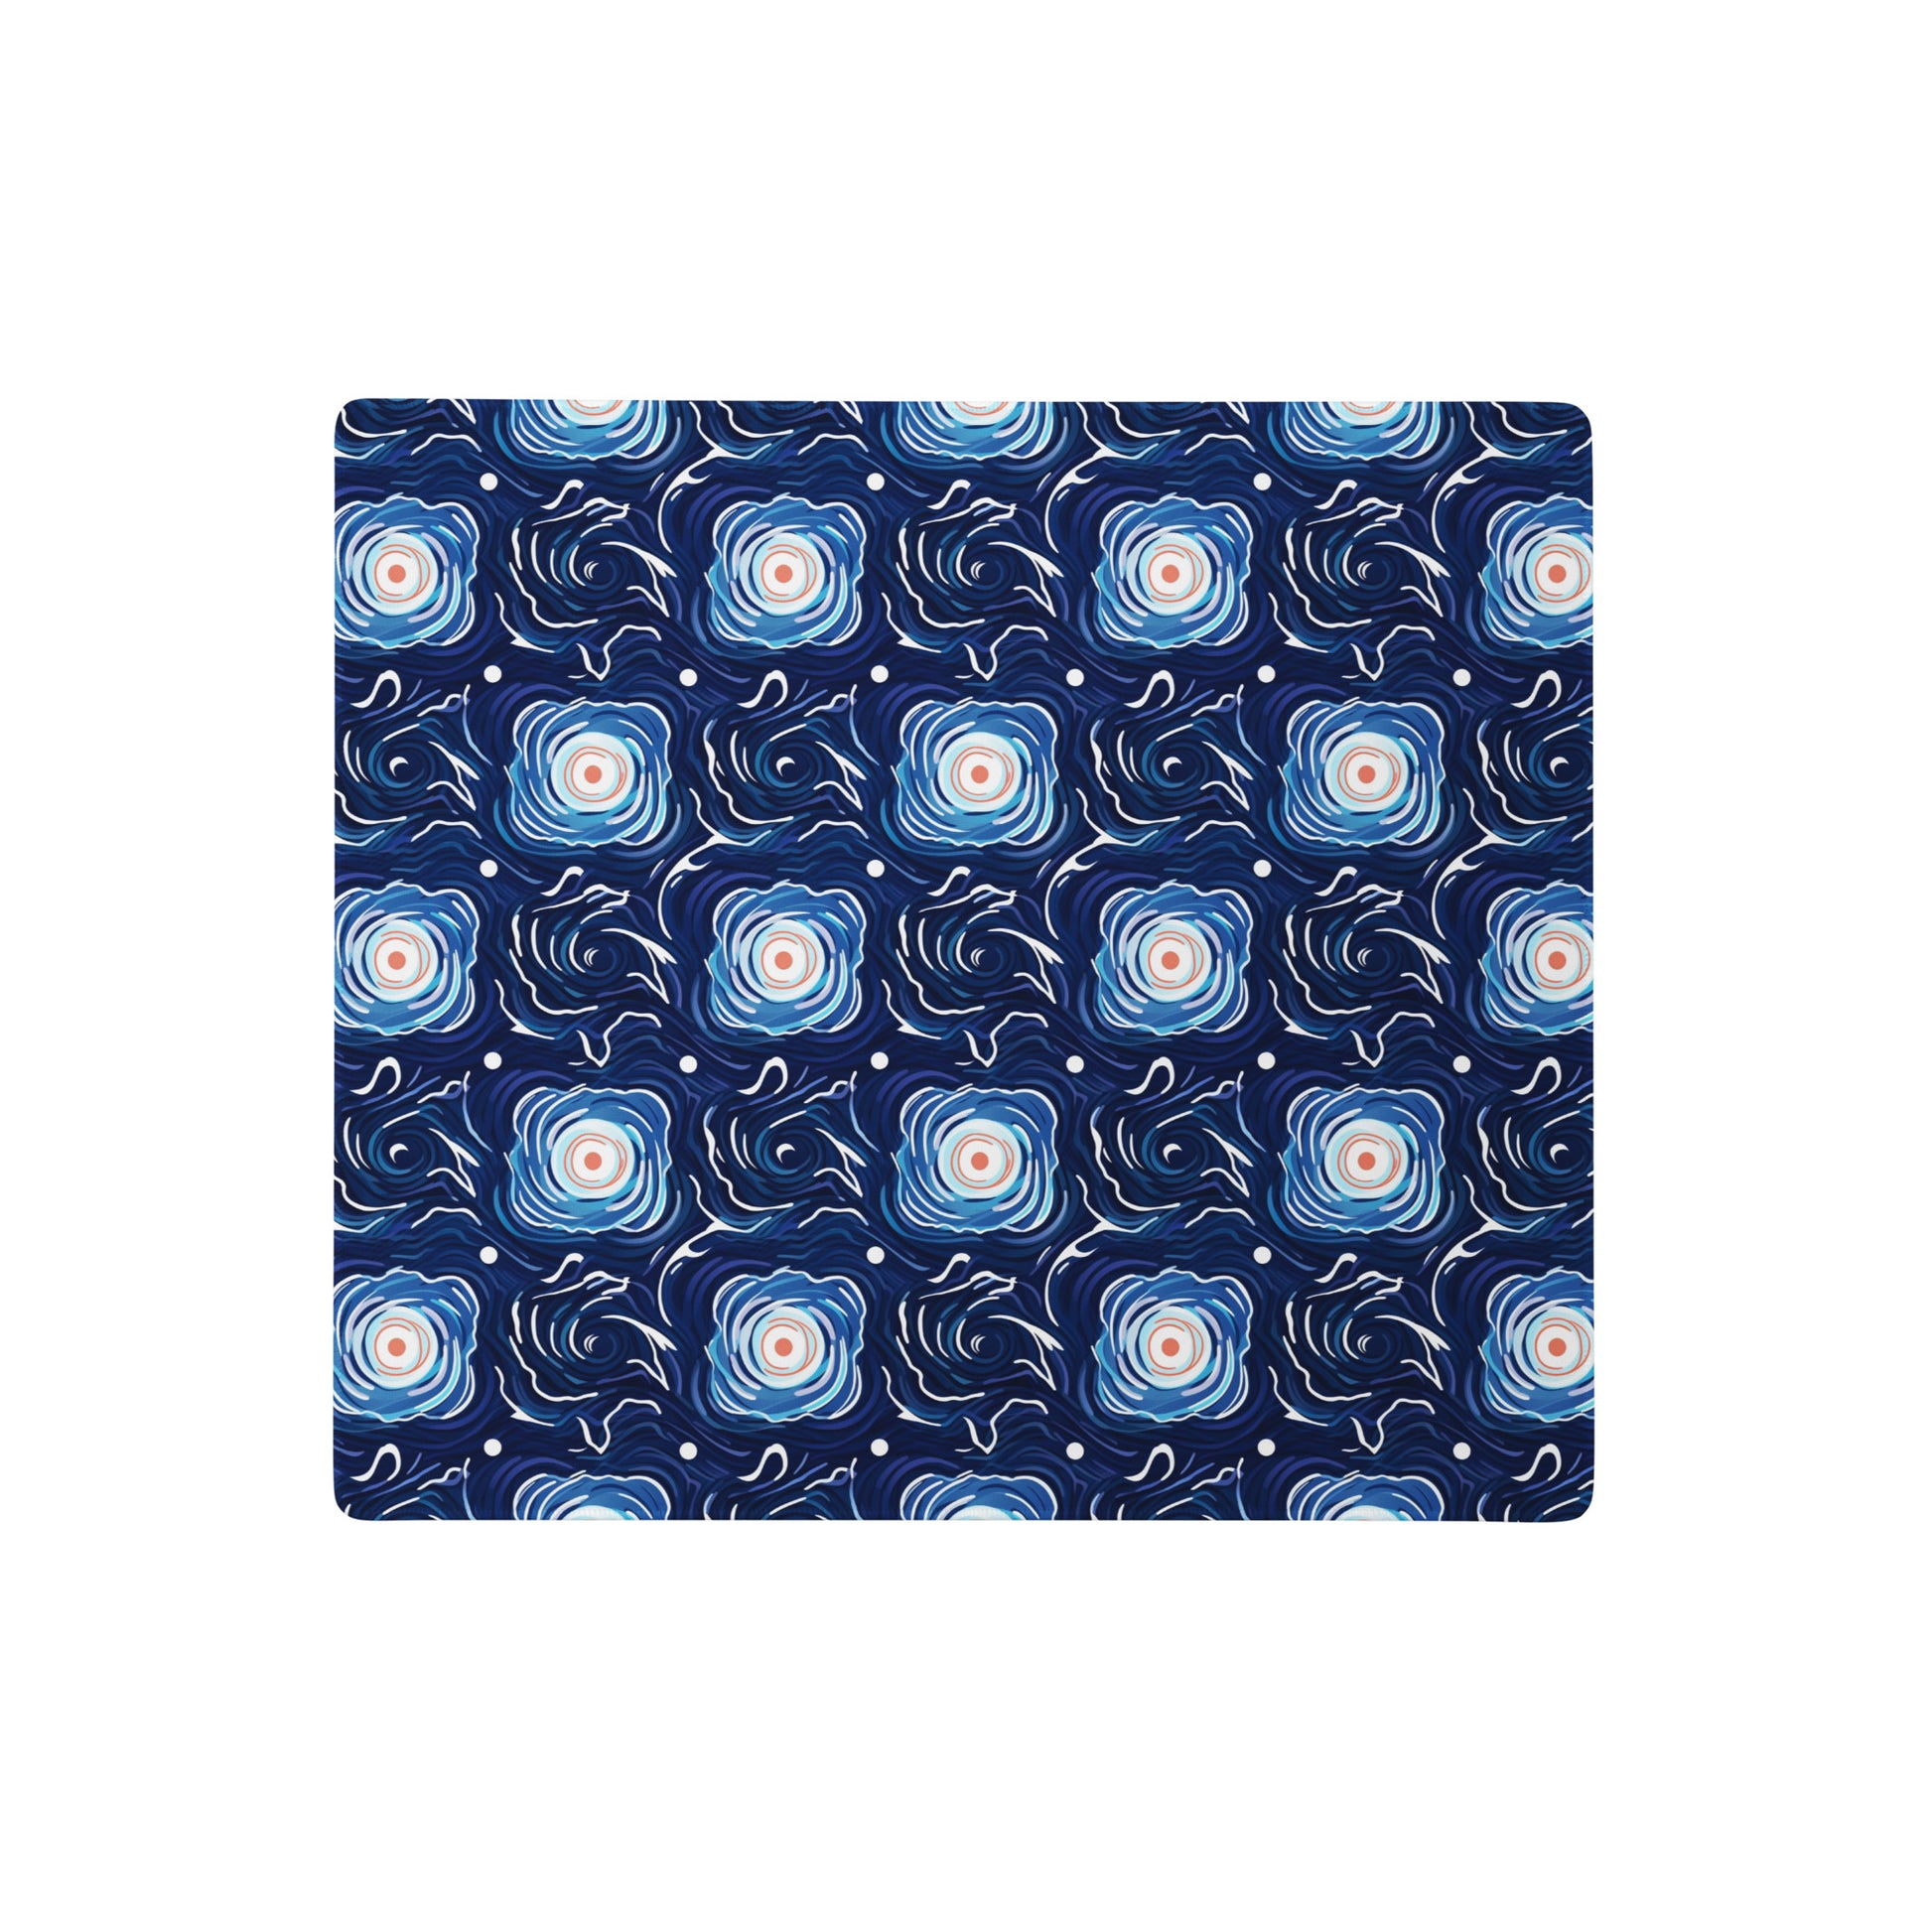 A 18" x 16" desk pad with a blue and white floral pattern.